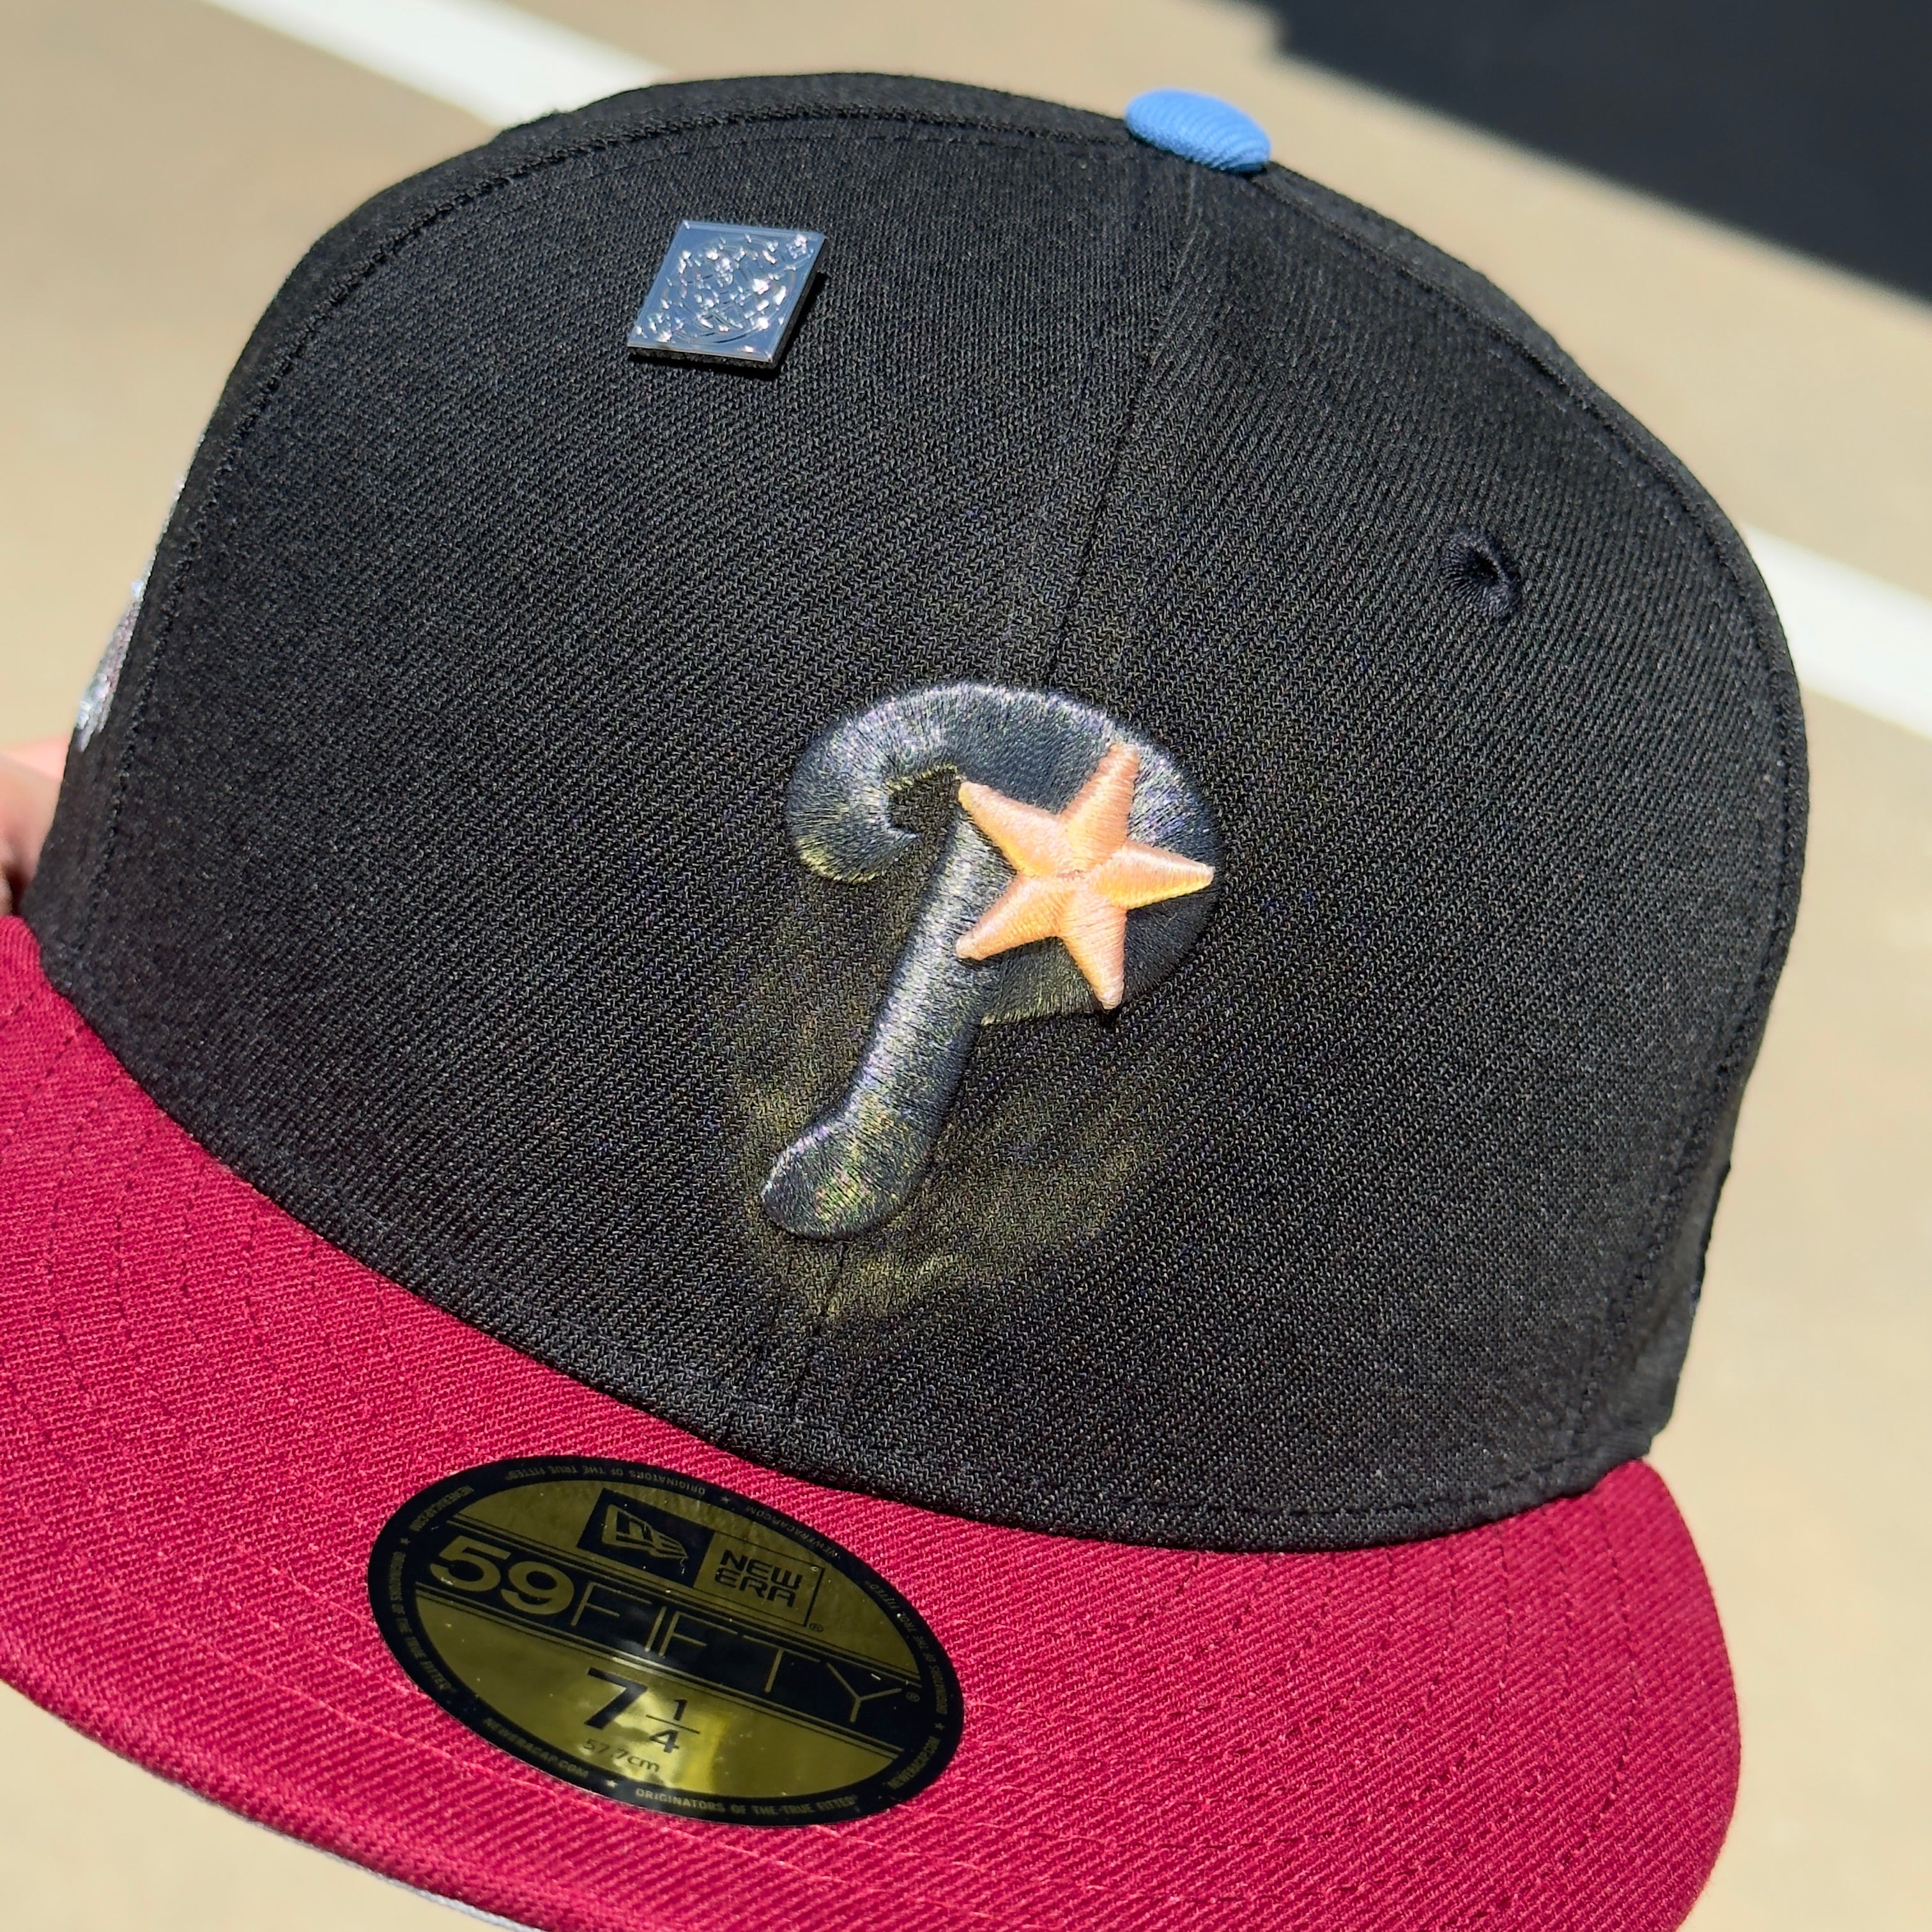 NEW Black Philadelphia Phillies All Star Game 1995 Capsule 59fifty New Era Fitted Hat Cap